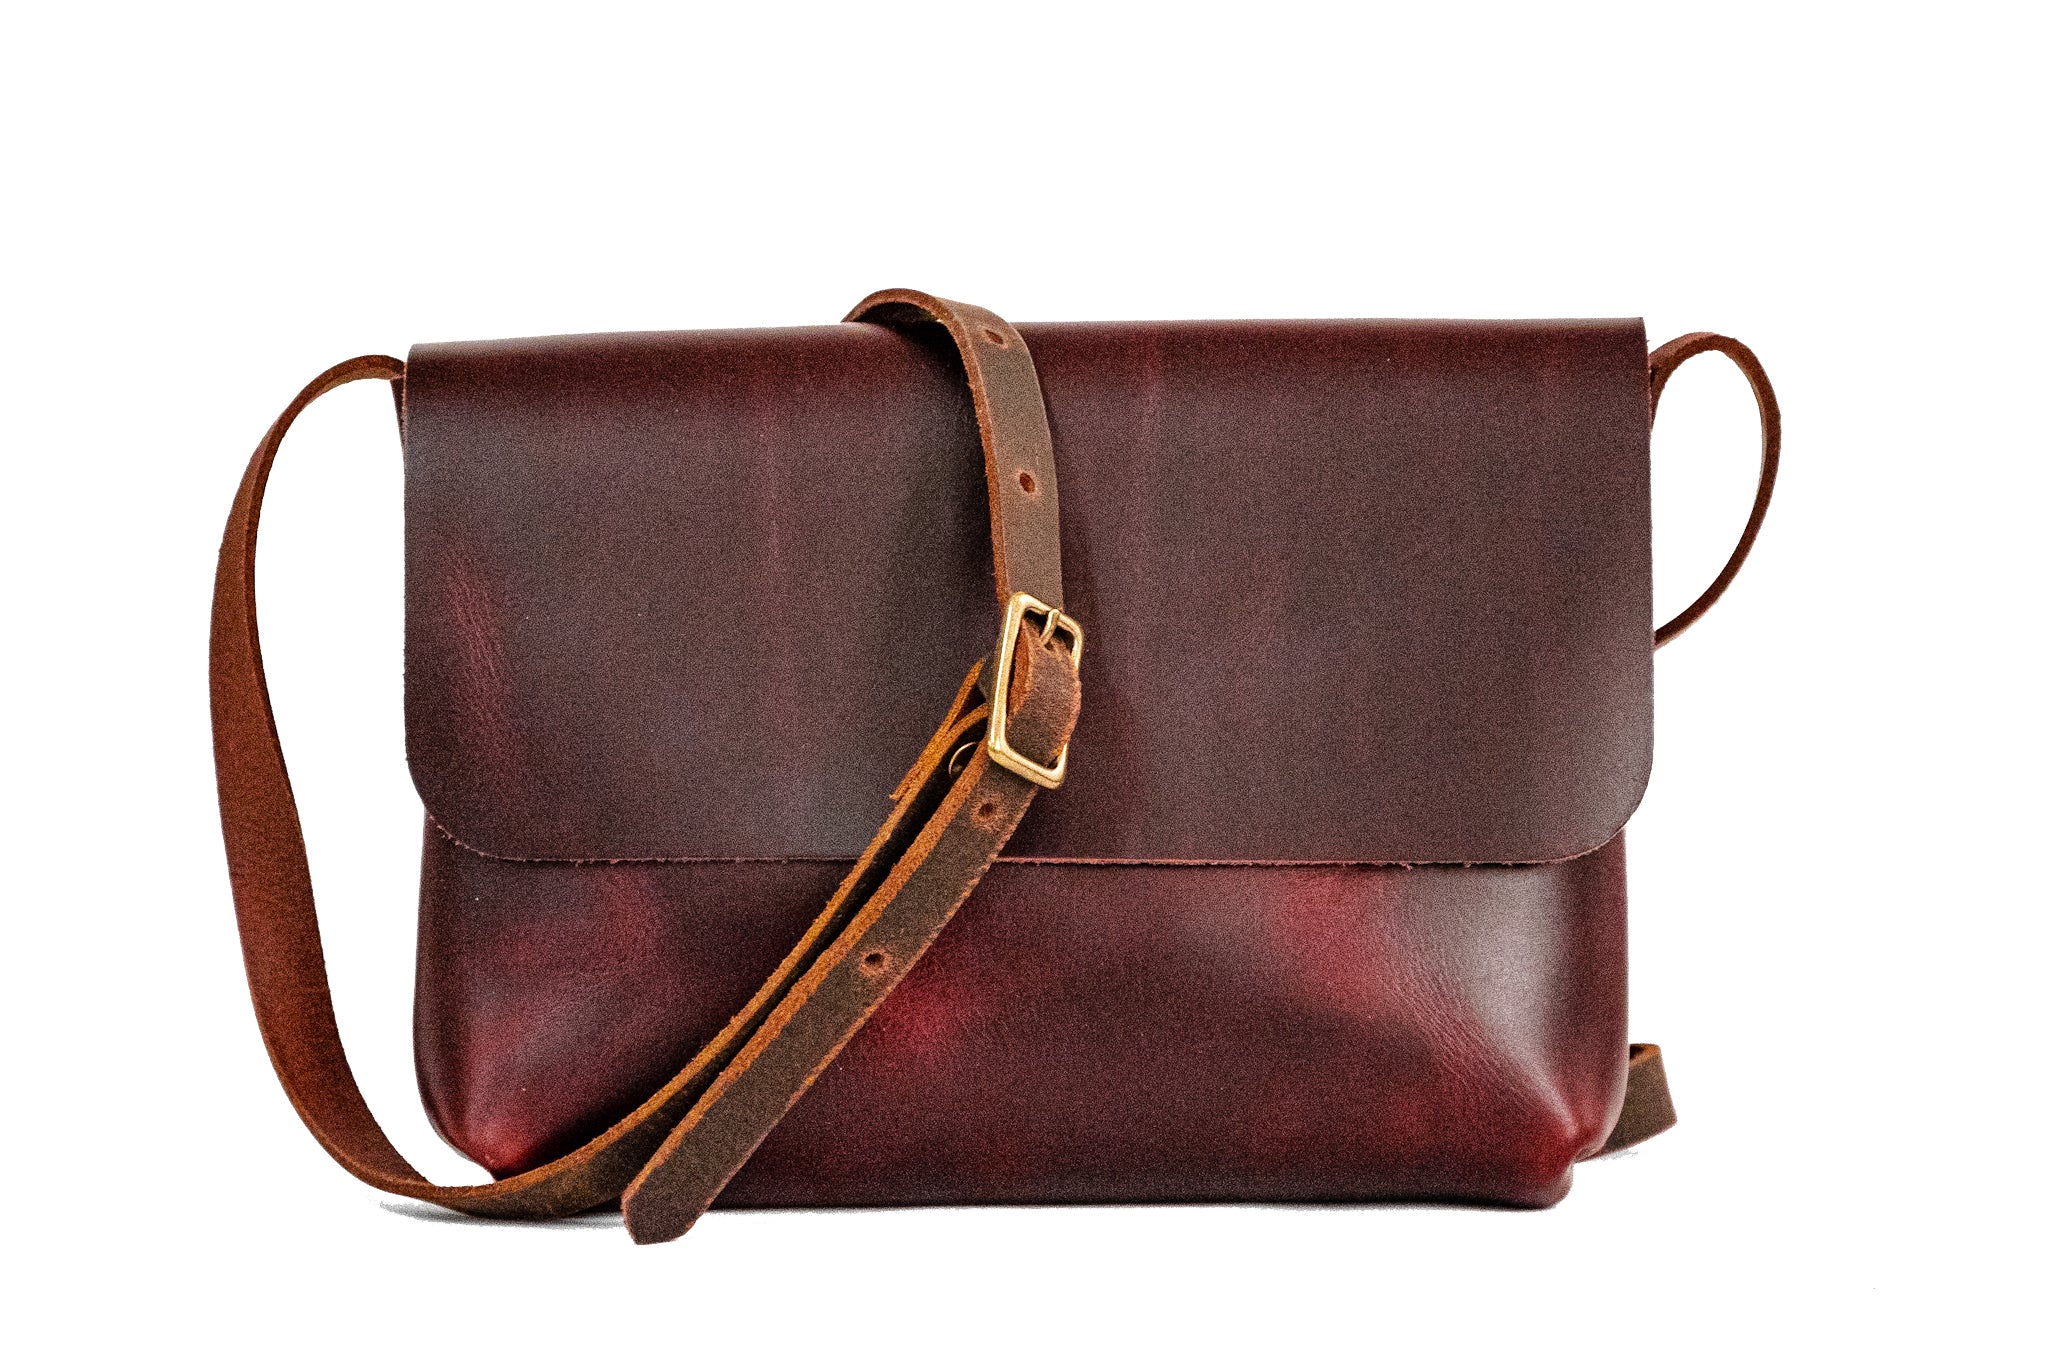 This Leather Crossbody Purse Is as Little as $22 on Amazon